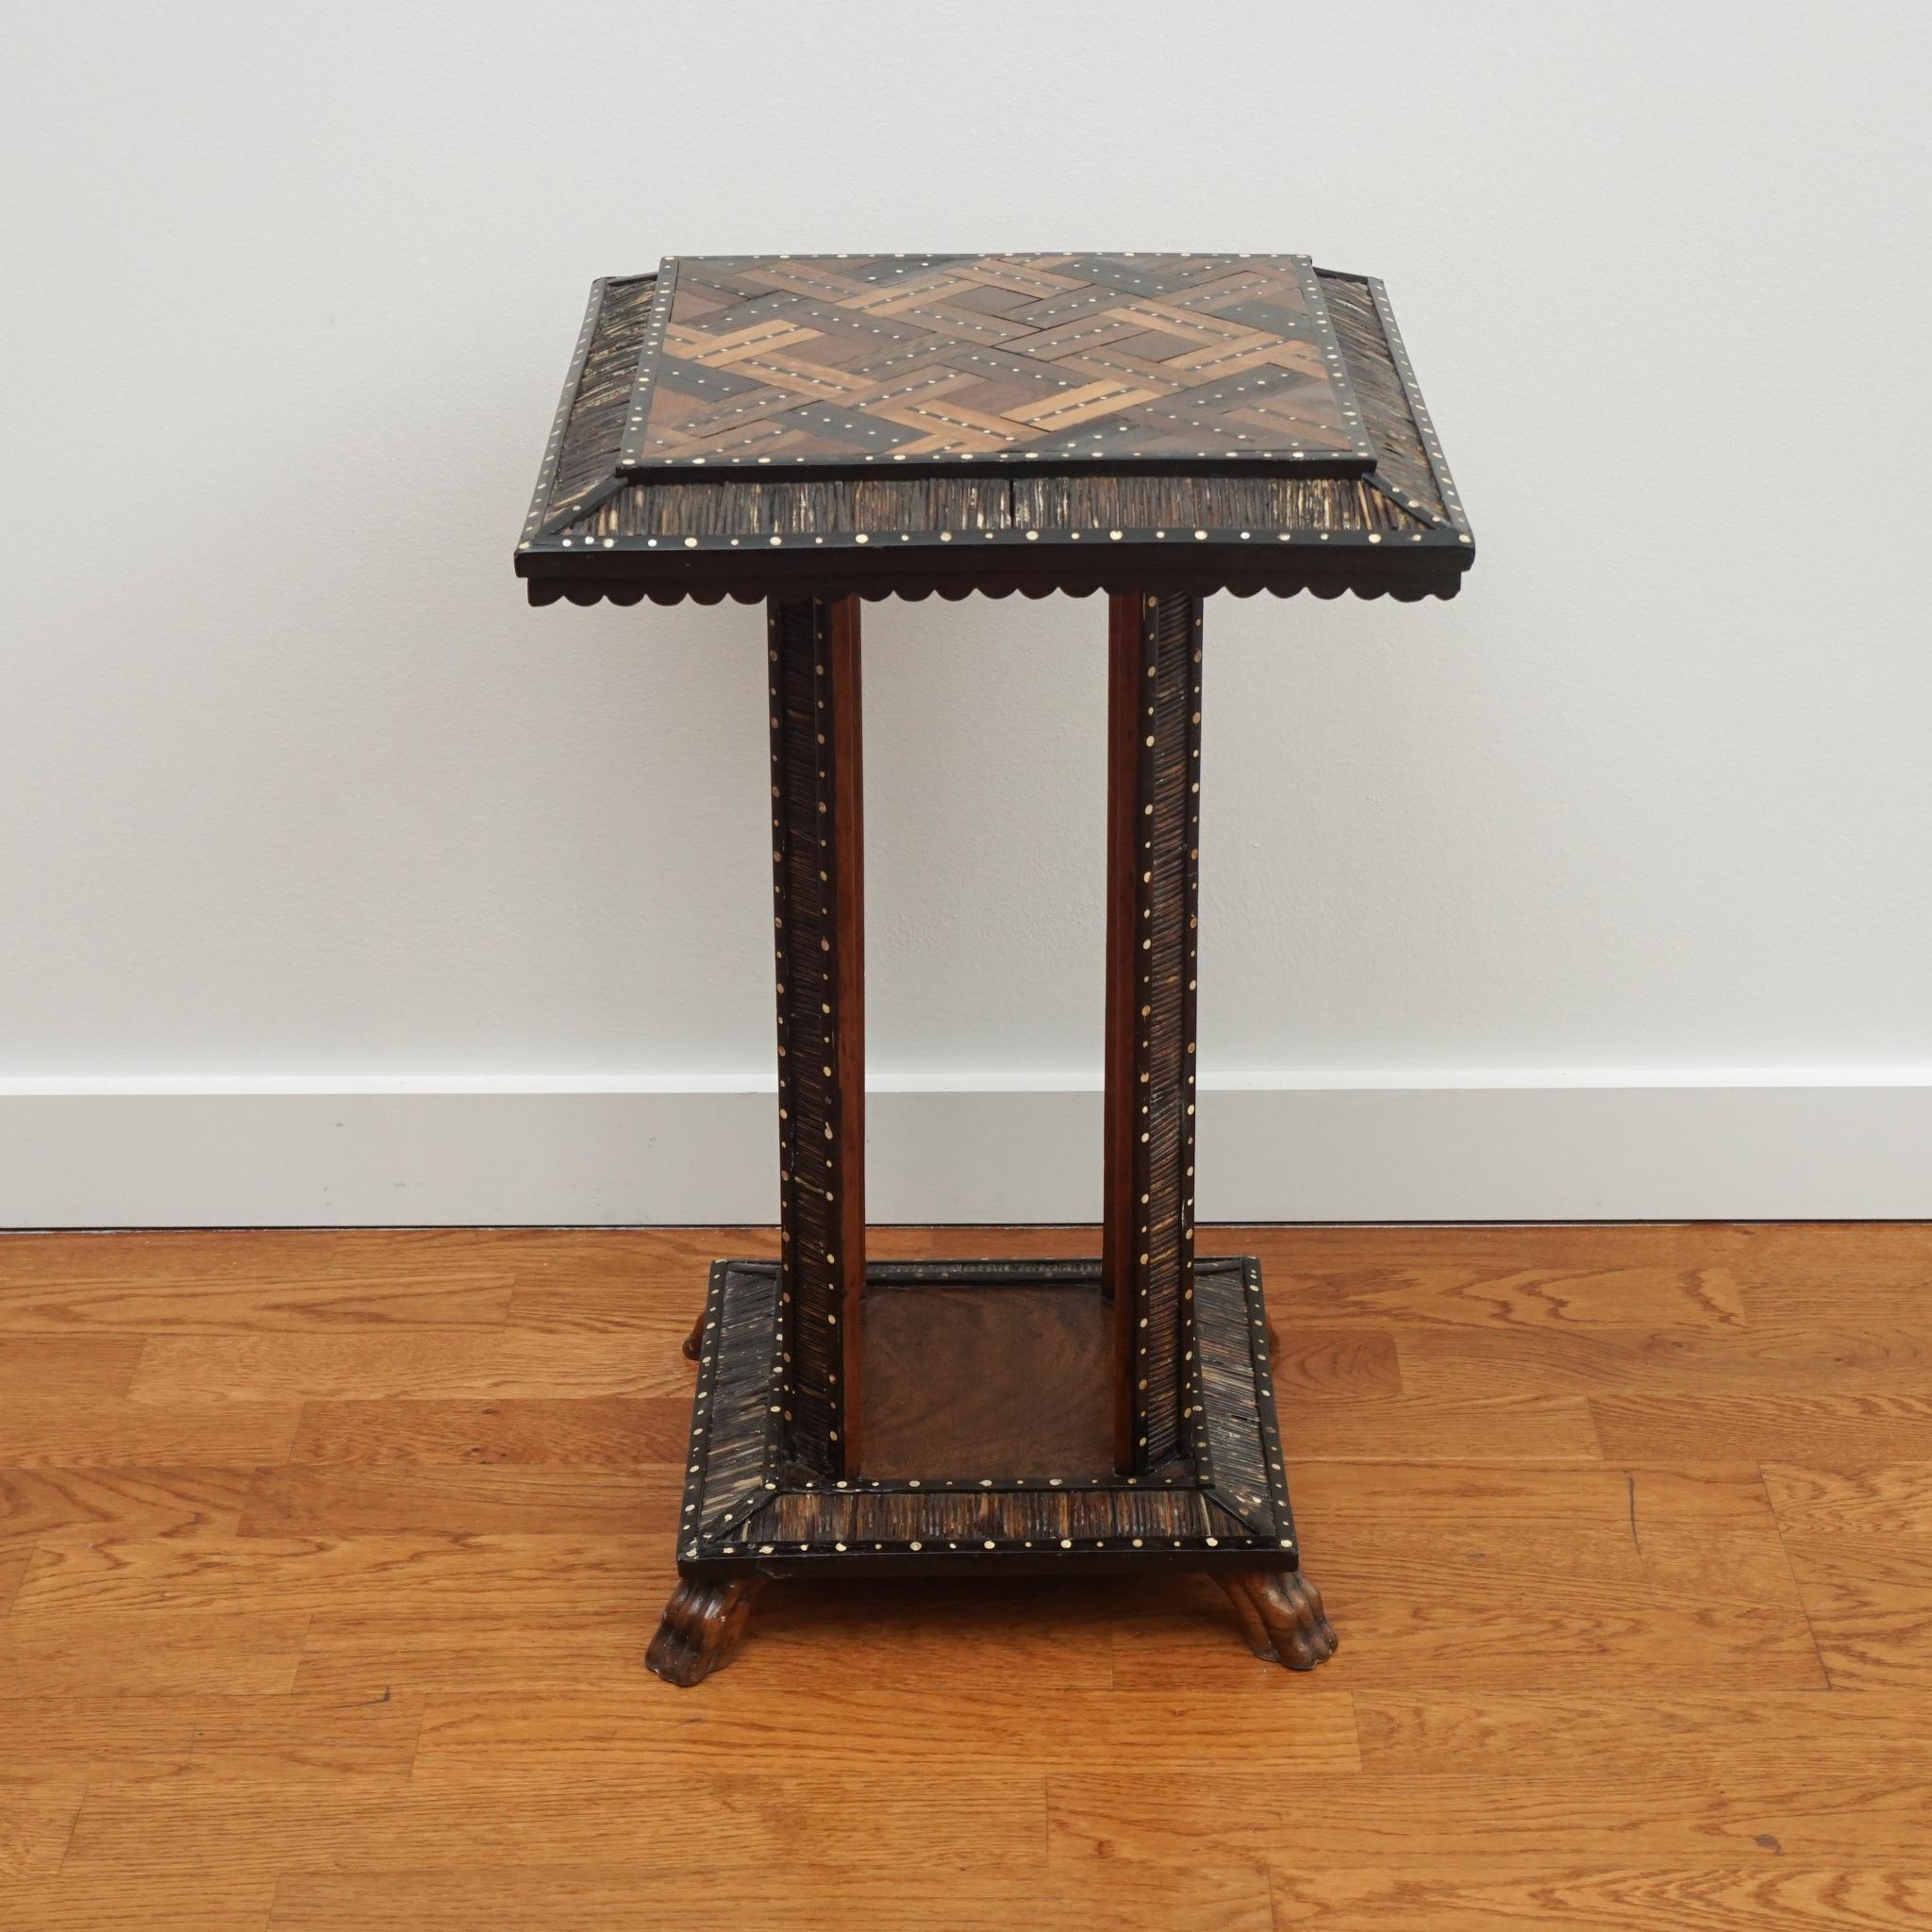 The small-scale antique accent table, shown here, is a true work of art. Combining ebony, ivory dots and tropical wood inlays throughout, the table top, legs and base are enhanced with porcupine quill detailing. The table is newly restored and in